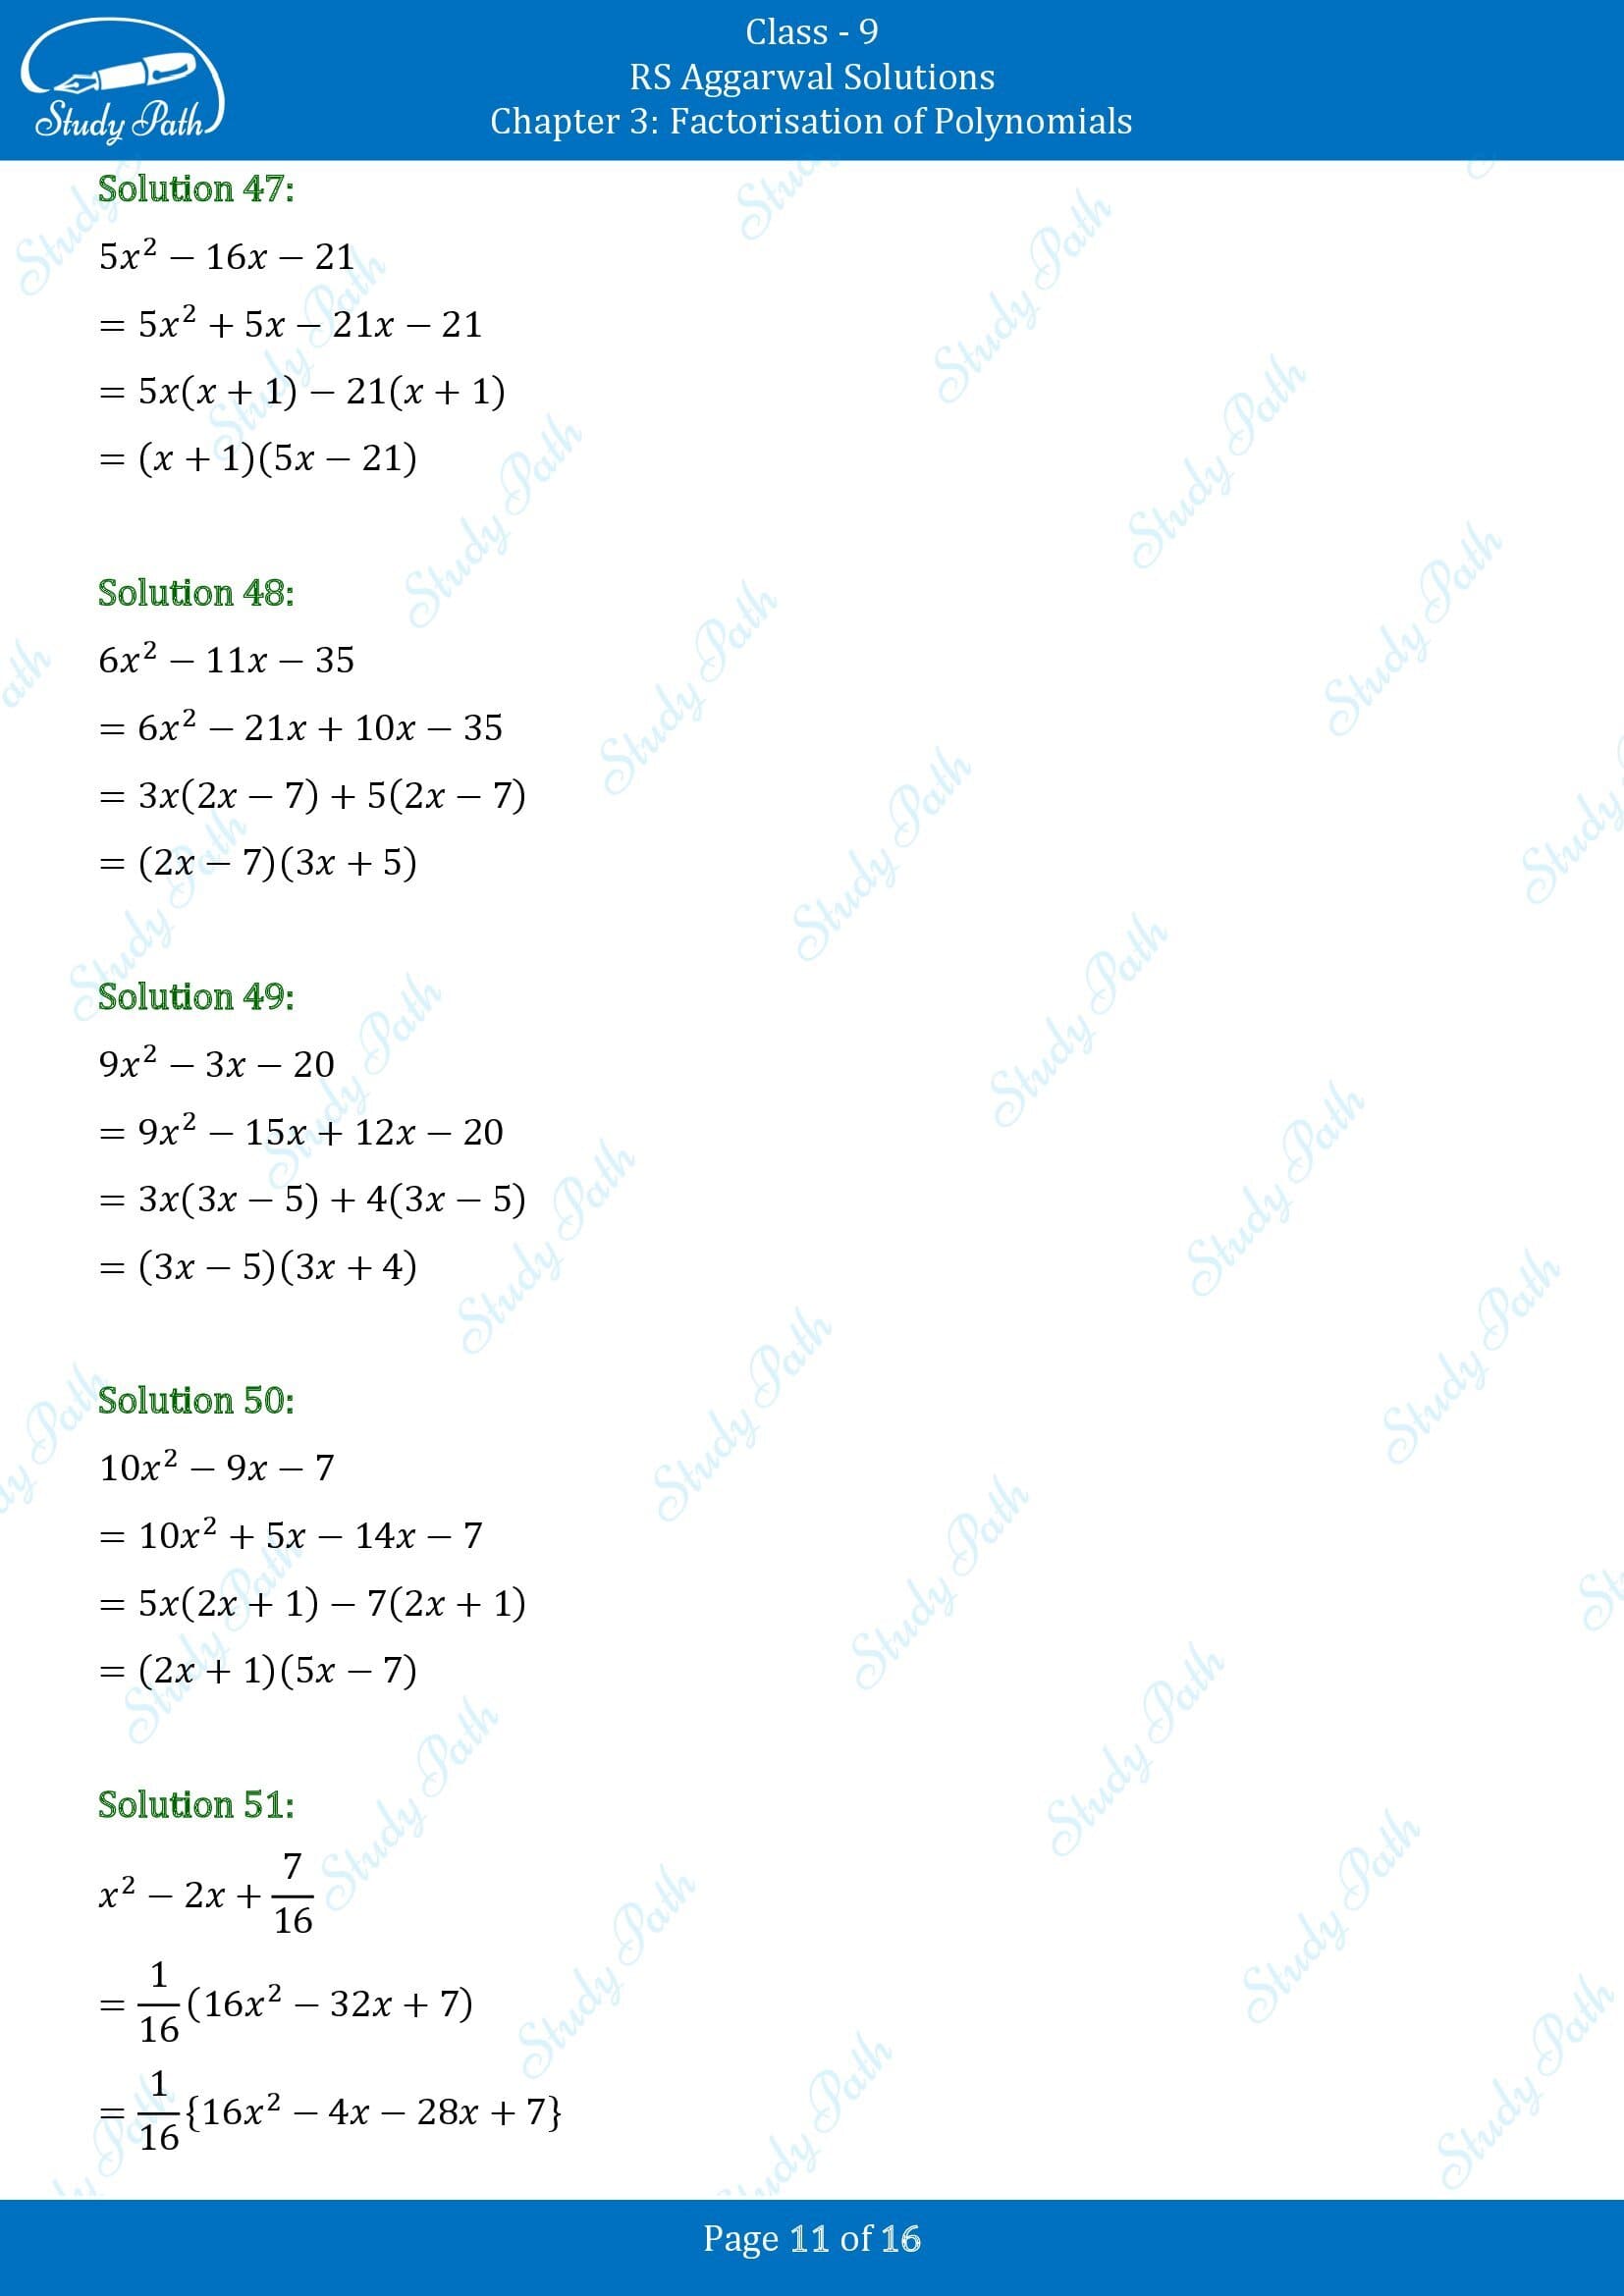 RS Aggarwal Solutions Class 9 Chapter 3 Factorisation of Polynomials Exercise 3C 00011